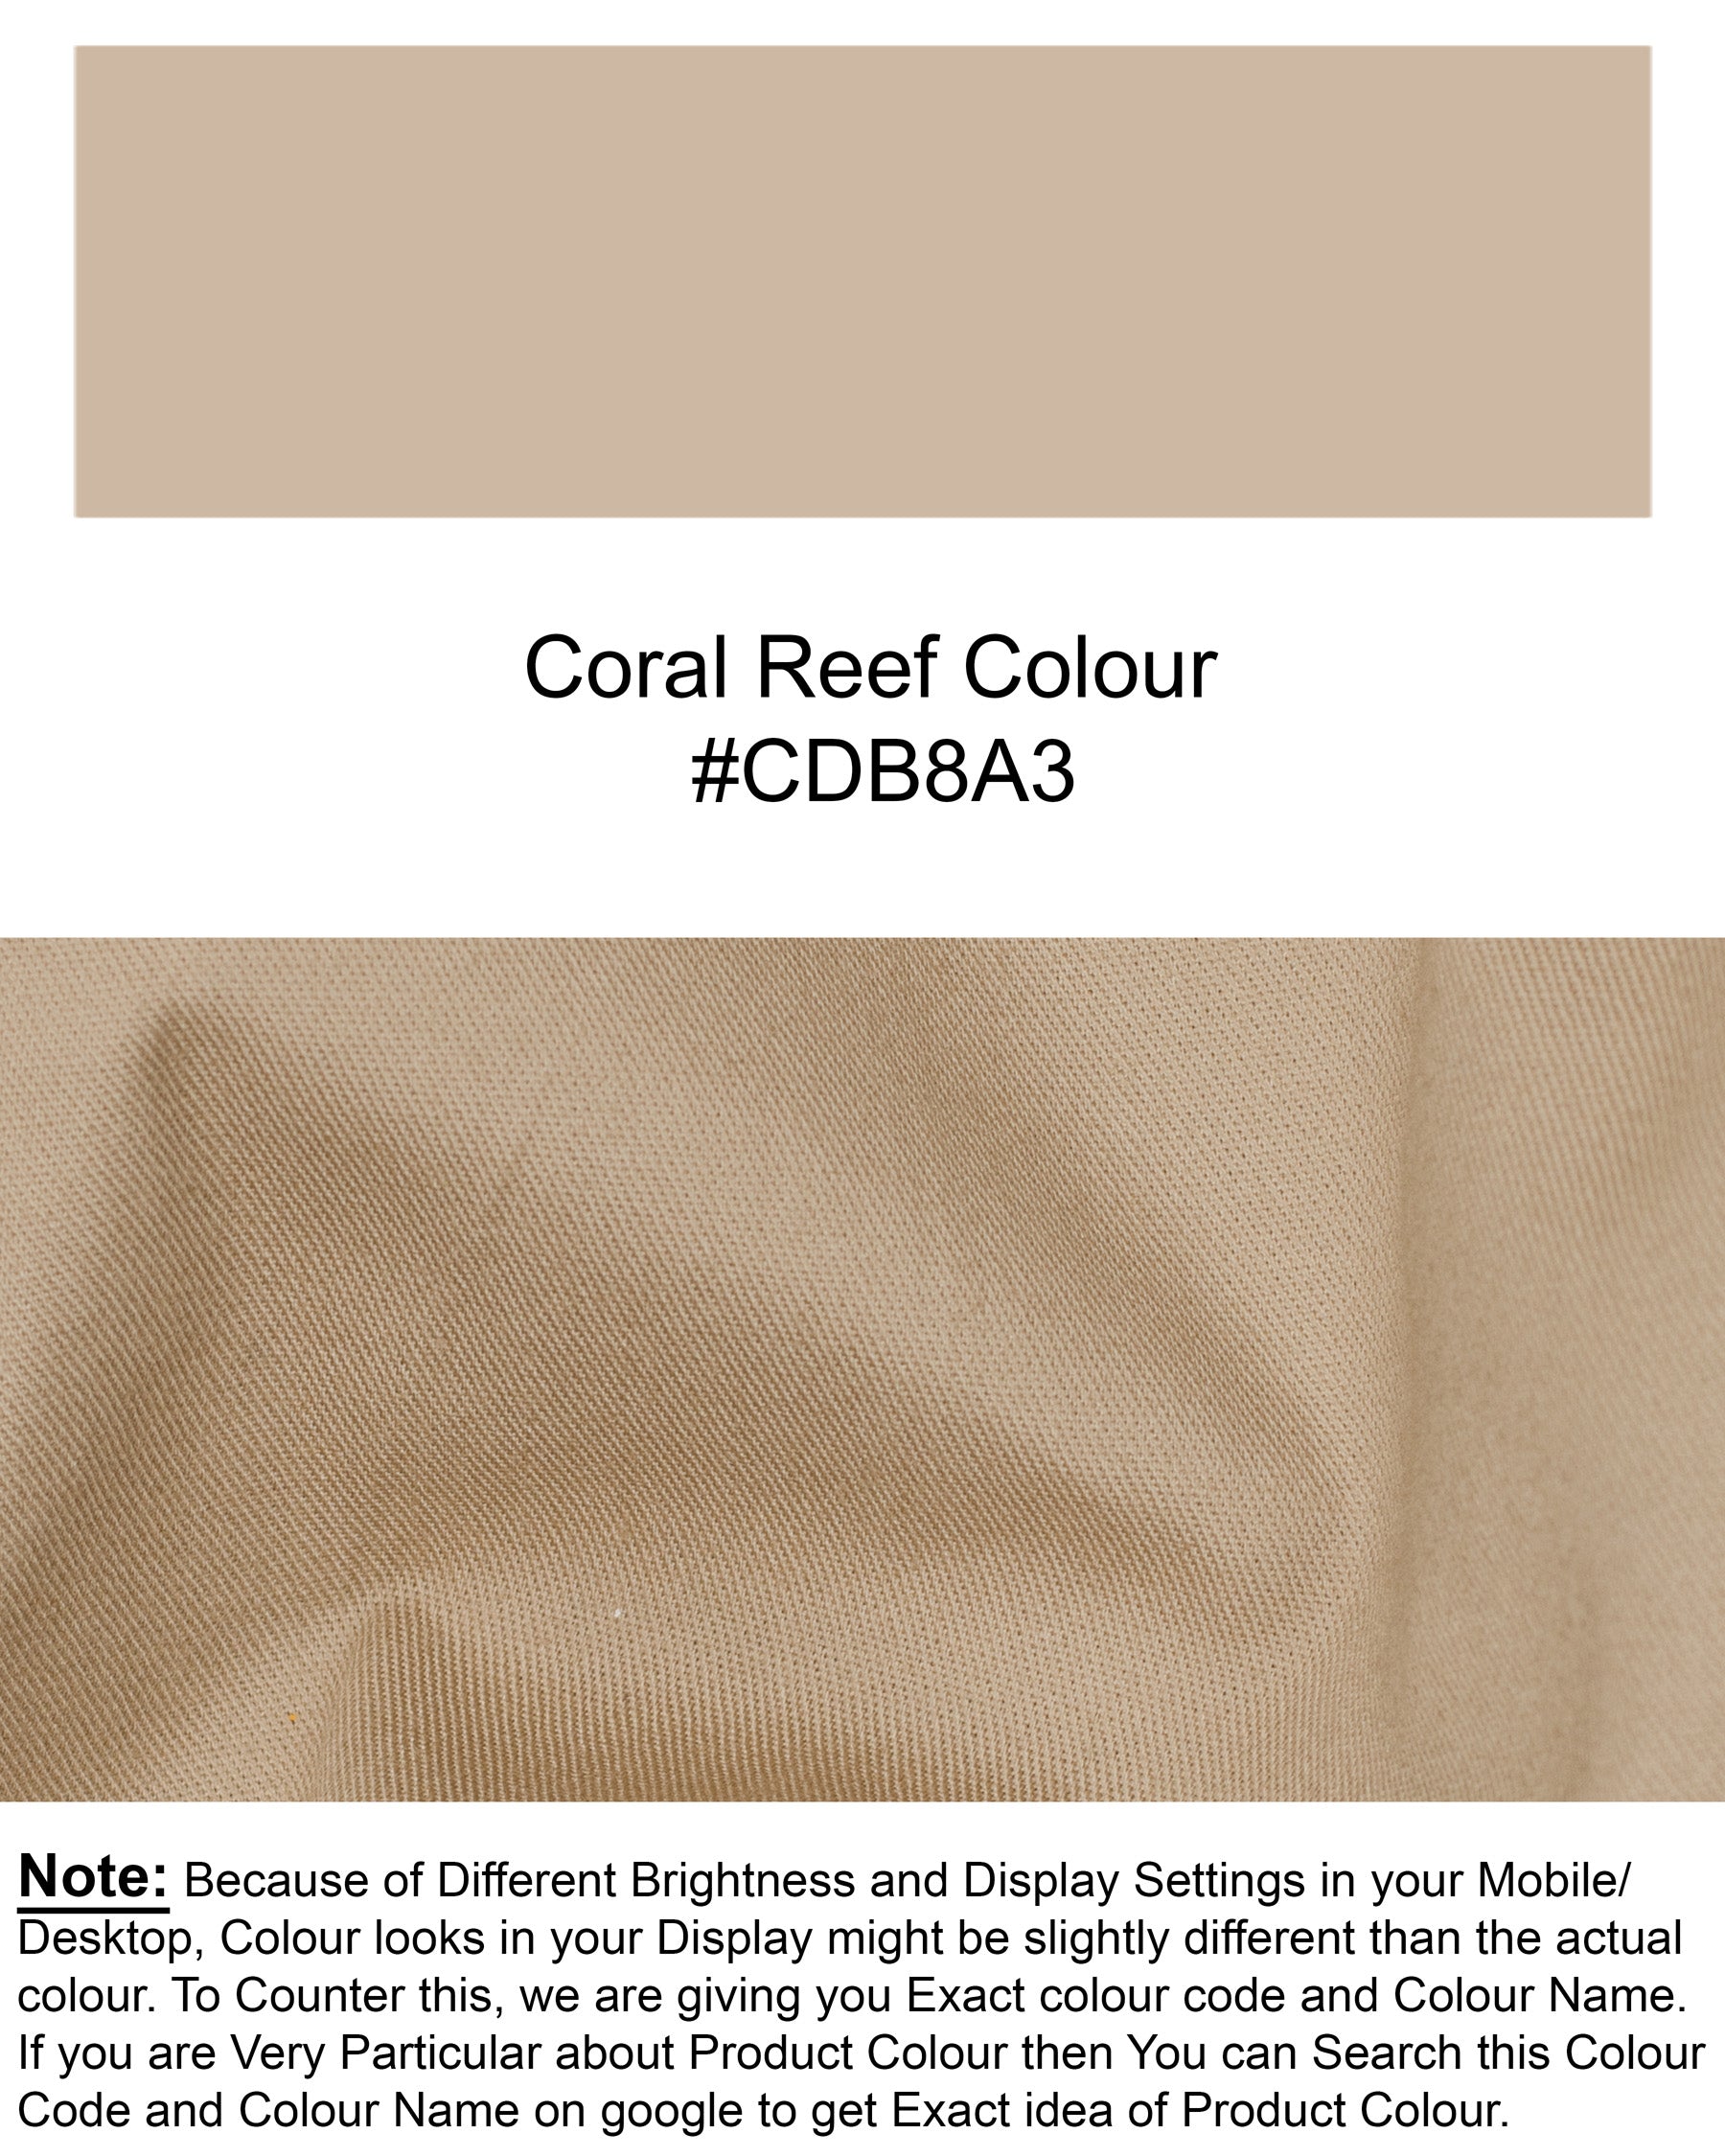 Coral Reef Double Breasted Wool Rich Blazer sBL1324-DB-36, BL1324-DB-38, BL1324-DB-40, BL1324-DB-42, BL1324-DB-44, BL1324-DB-46, BL1324-DB-48, BL1324-DB-50, BL1324-DB-52, BL1324-DB-54, BL1324-DB-56, BL1324-DB-58, BL1324-DB-60